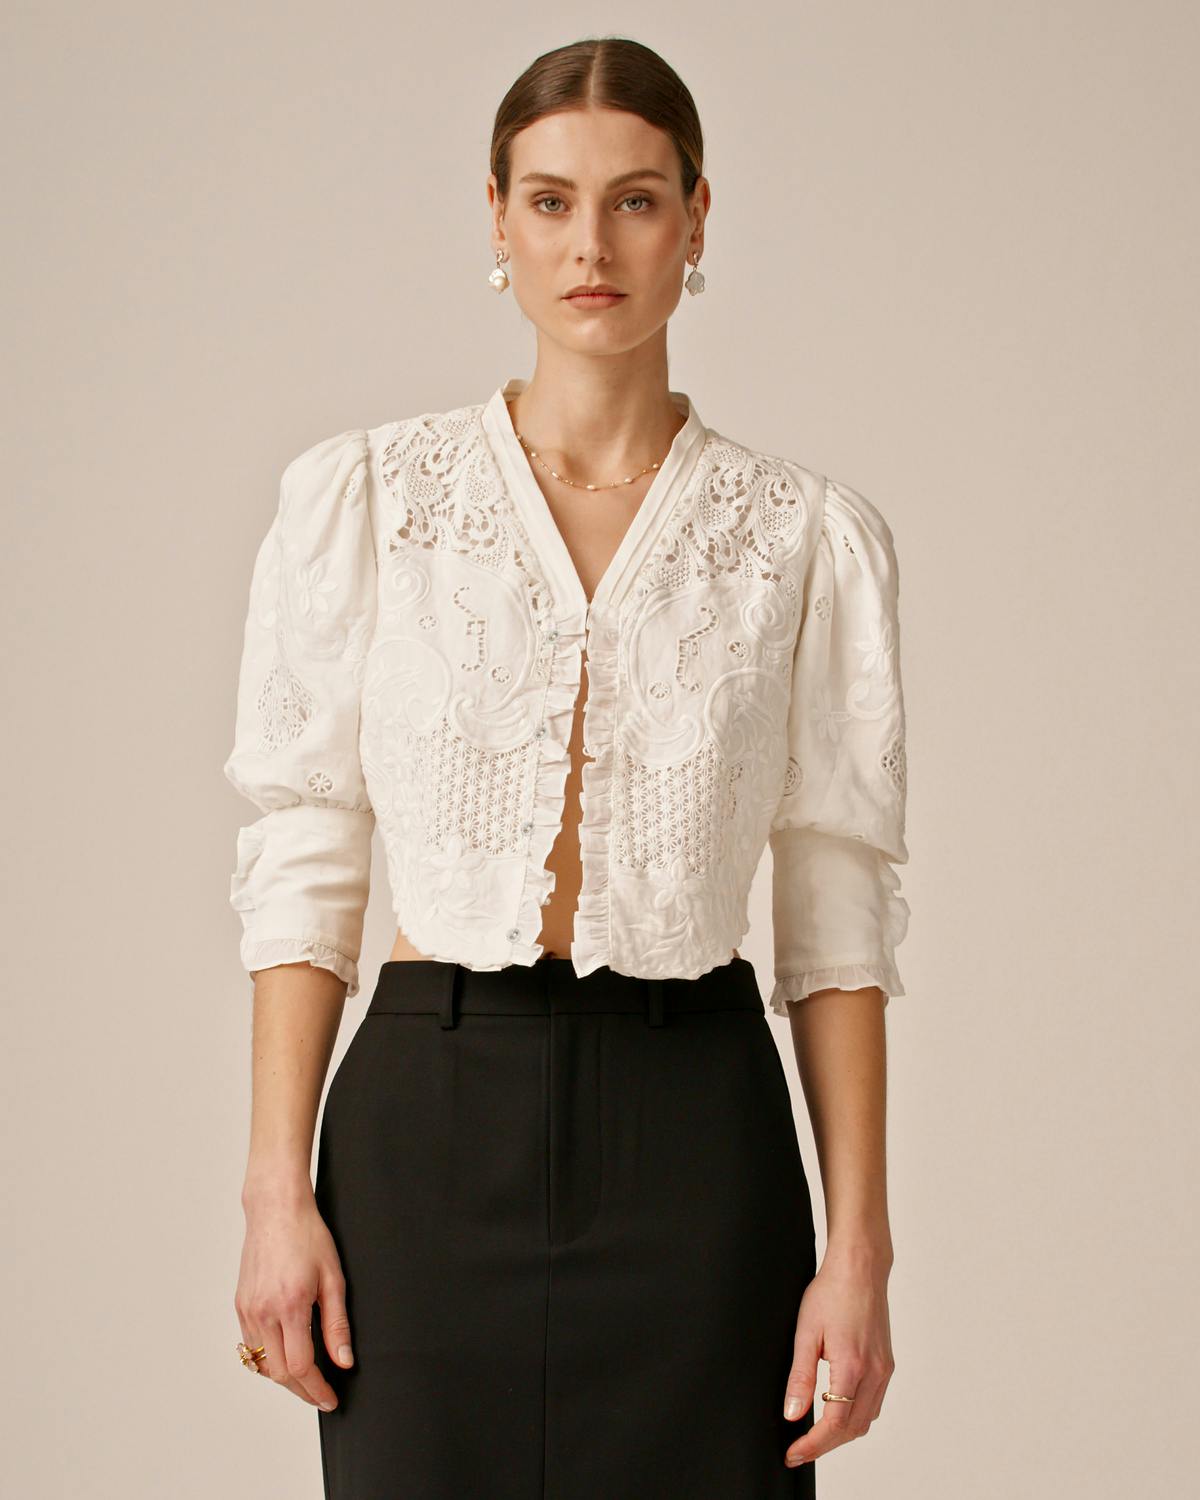 Linen Embroidery Jacket, White. Image #4